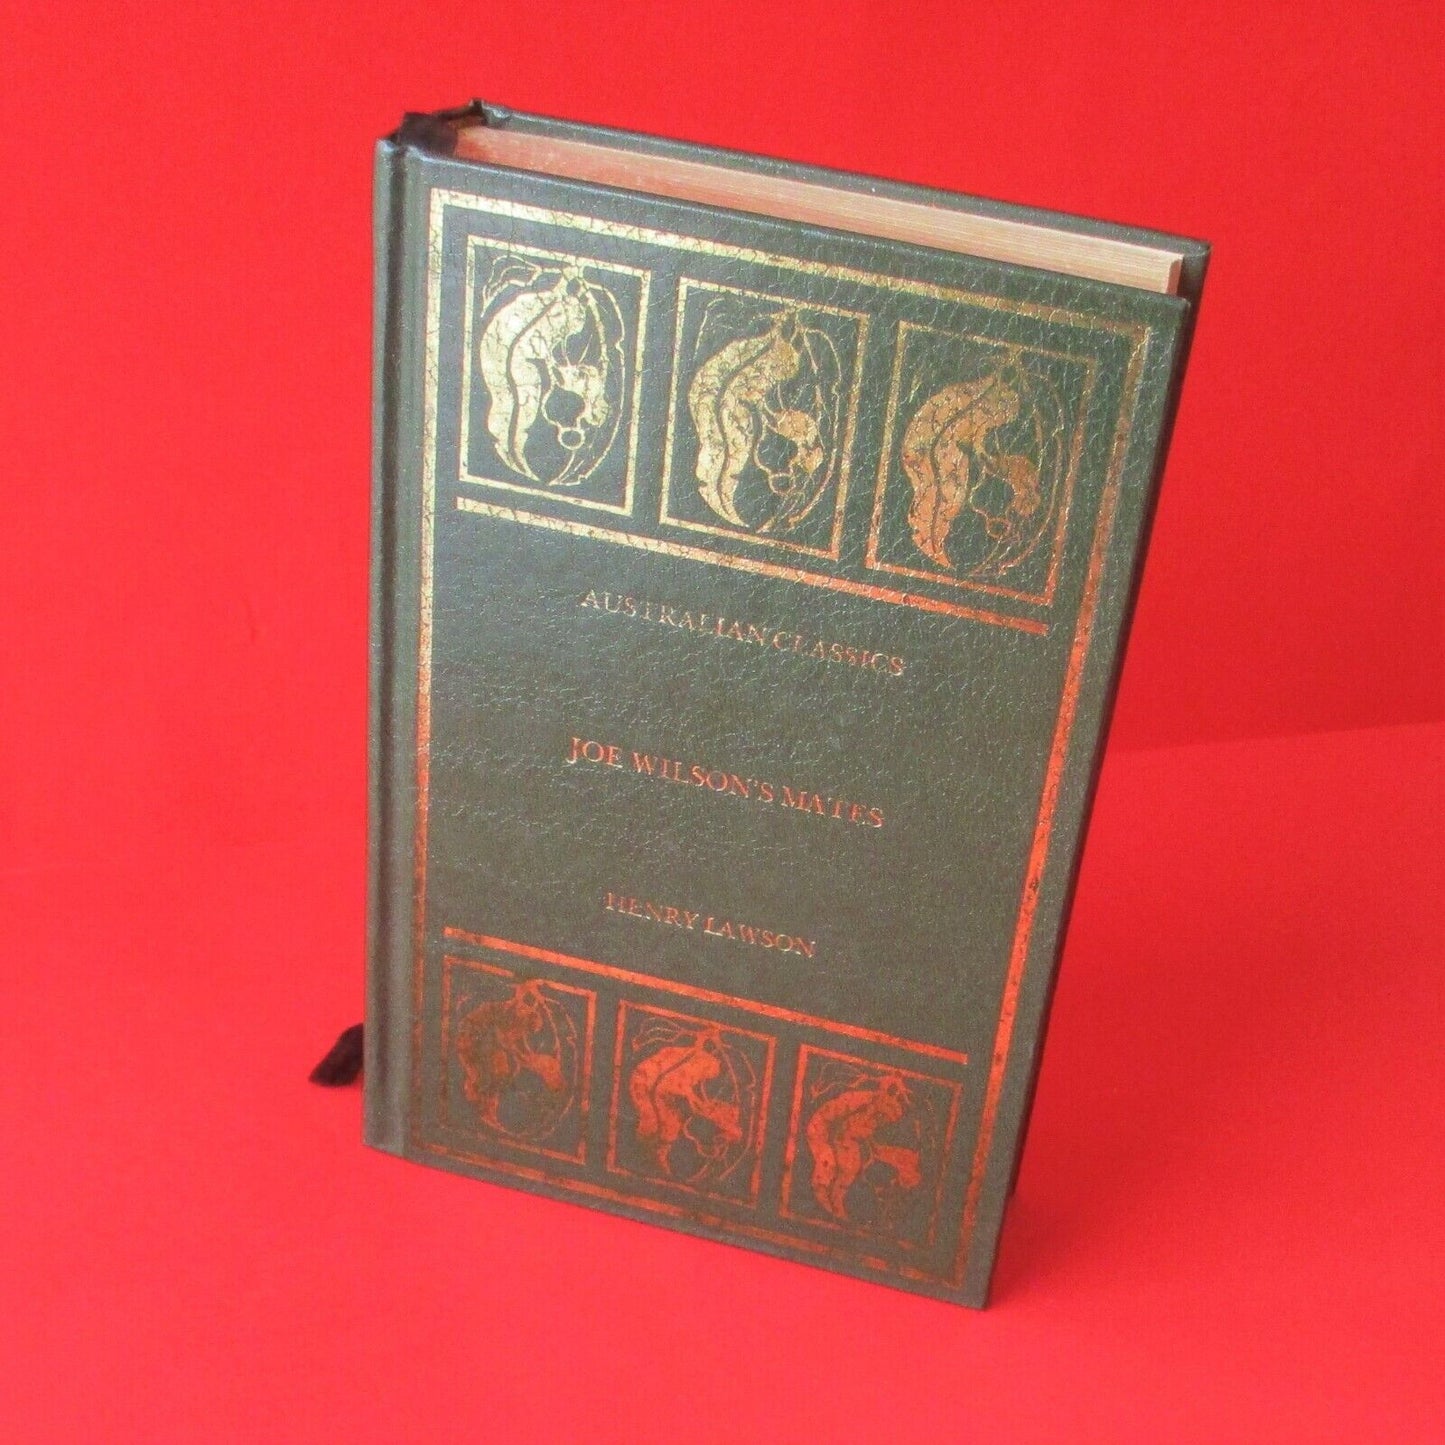 Joe Wilson’s Mates 56 Stories From The Prose Work Of Henry Lawson Hardcover